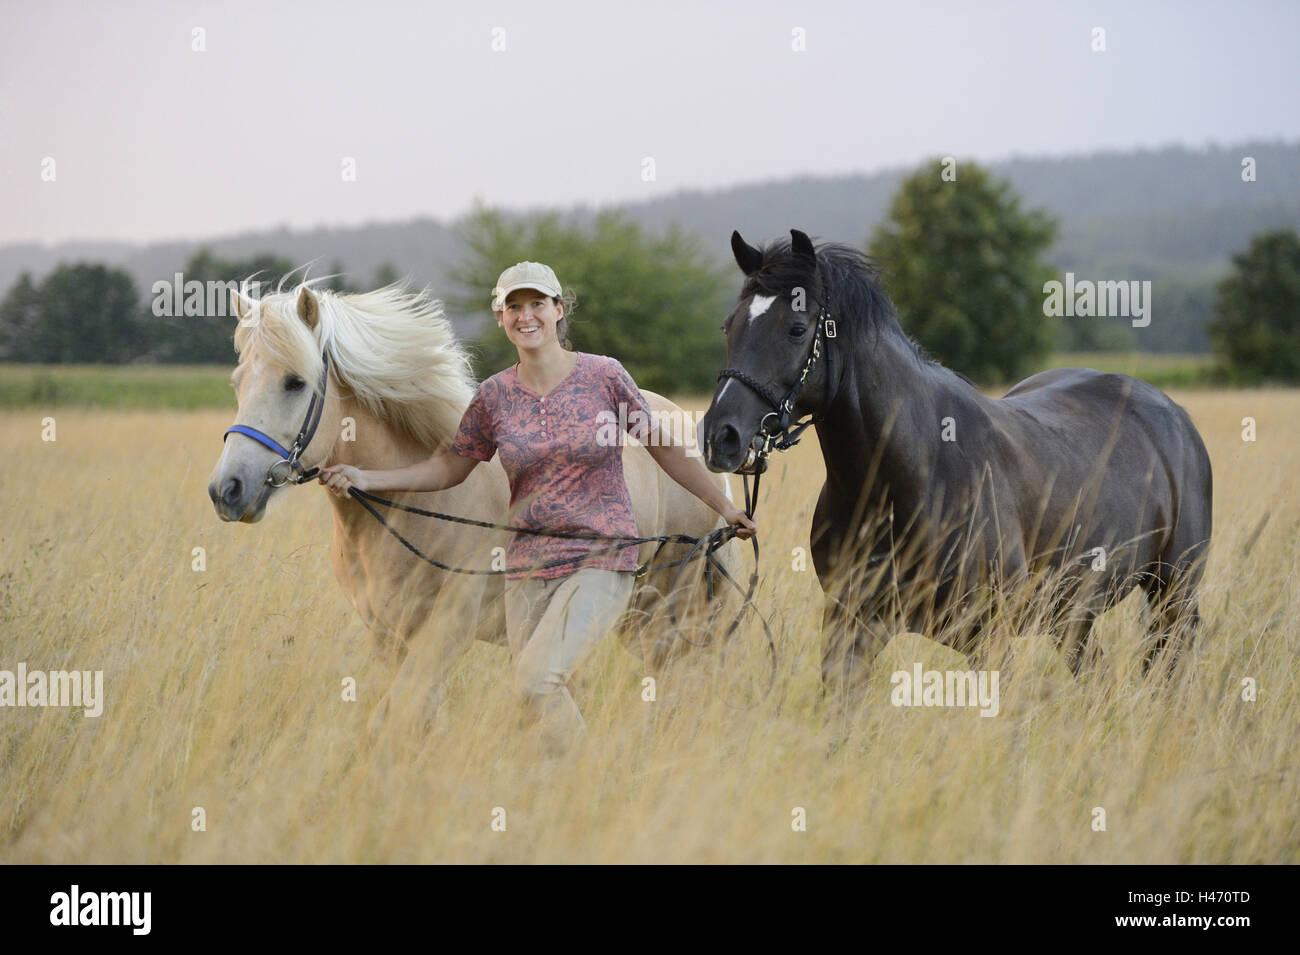 Rider, horses, meadow, looking at camera, landscape, Stock Photo